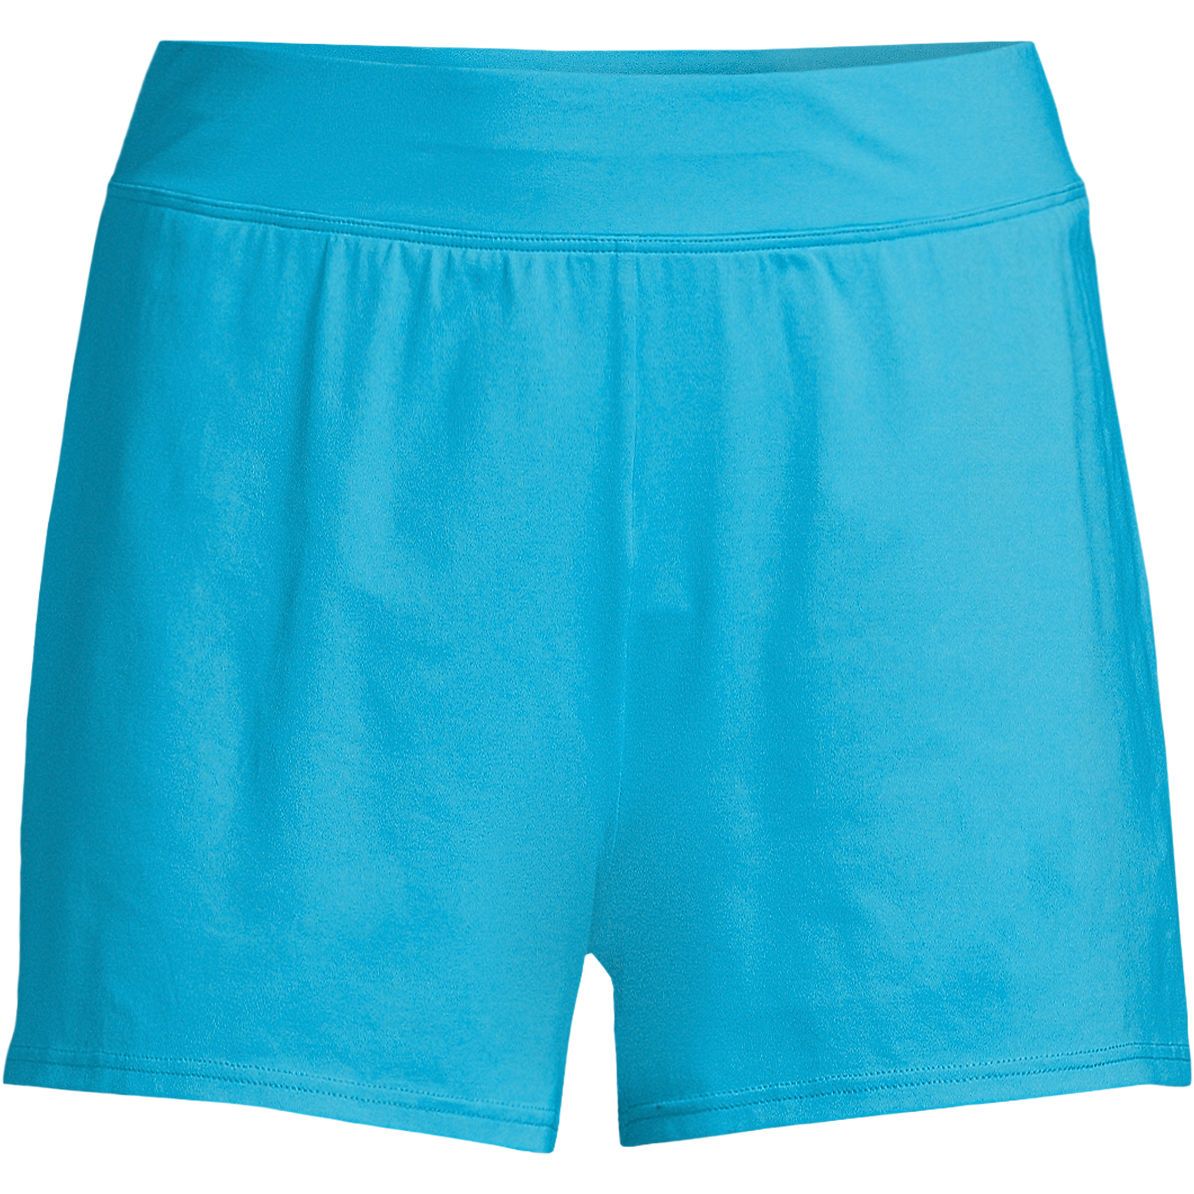 Women's Chlorine Resistant Smoothing Control 3" Swim Shorts | Lands' End (US)